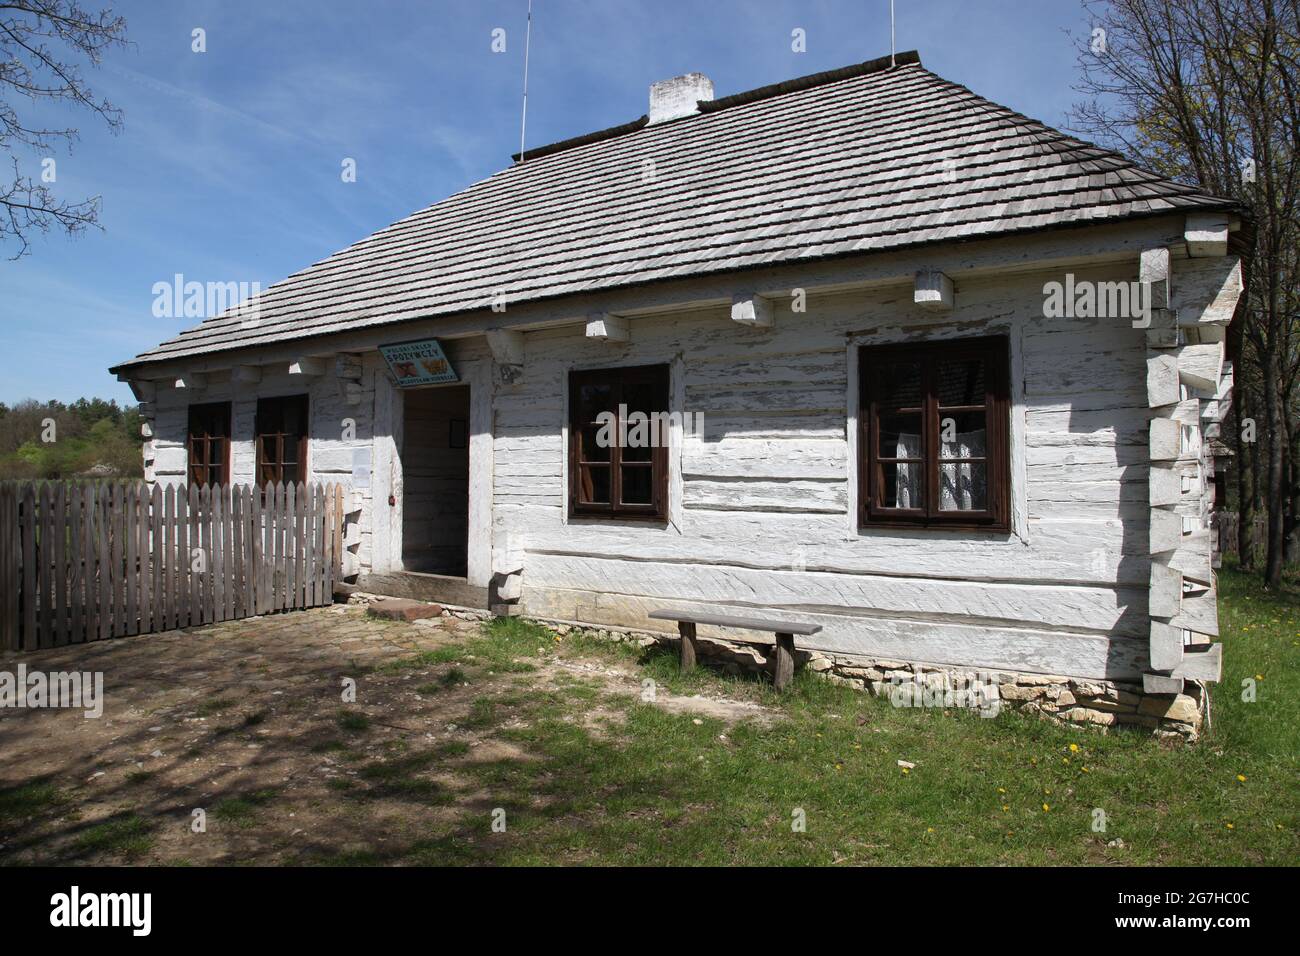 Old country cottage, open-air museum in Tokarnia, rural architecture, wooden architecture, Tokarnia, Stock Photo